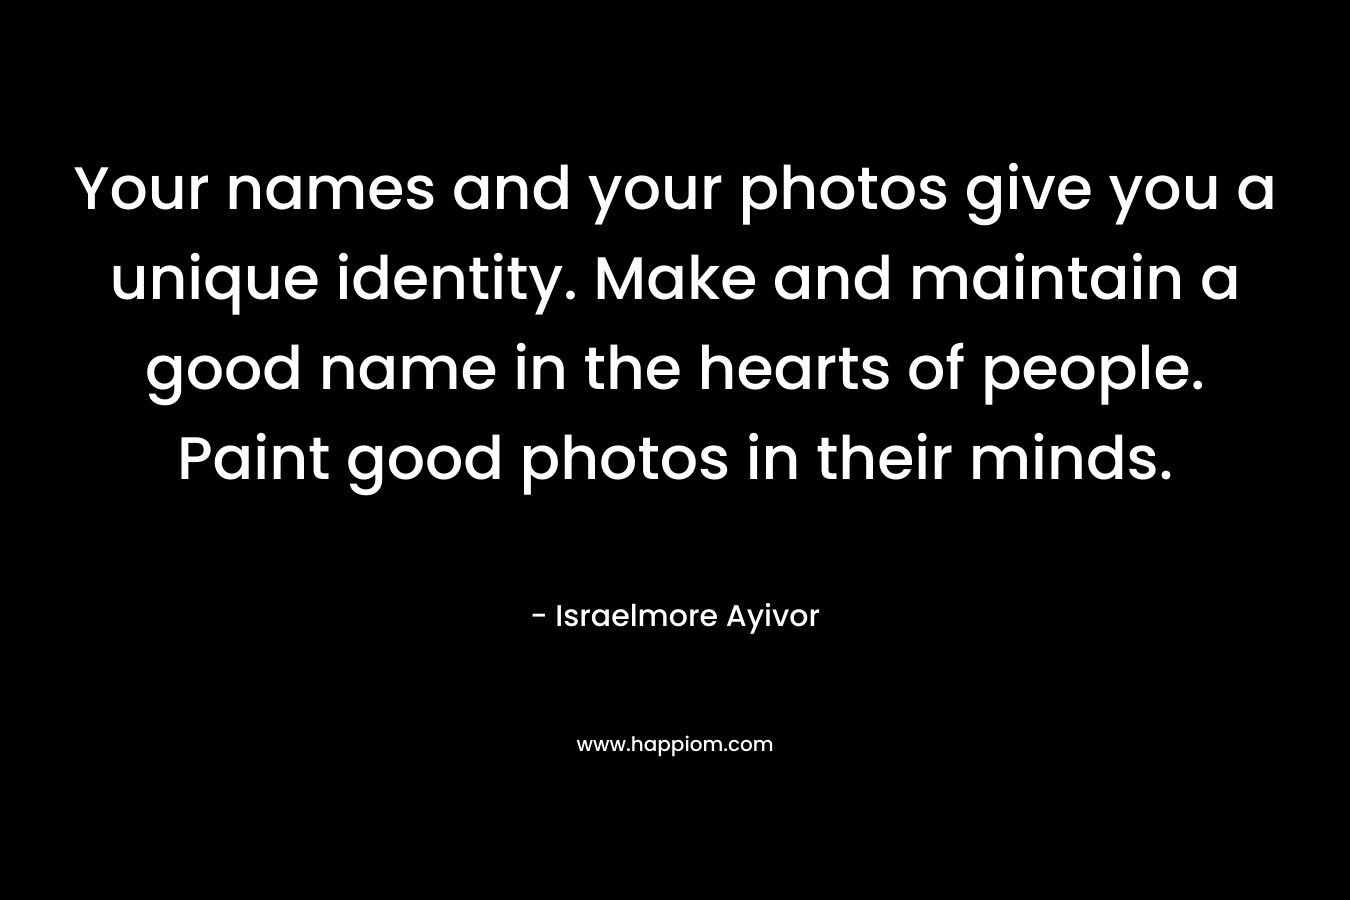 Your names and your photos give you a unique identity. Make and maintain a good name in the hearts of people. Paint good photos in their minds. – Israelmore Ayivor